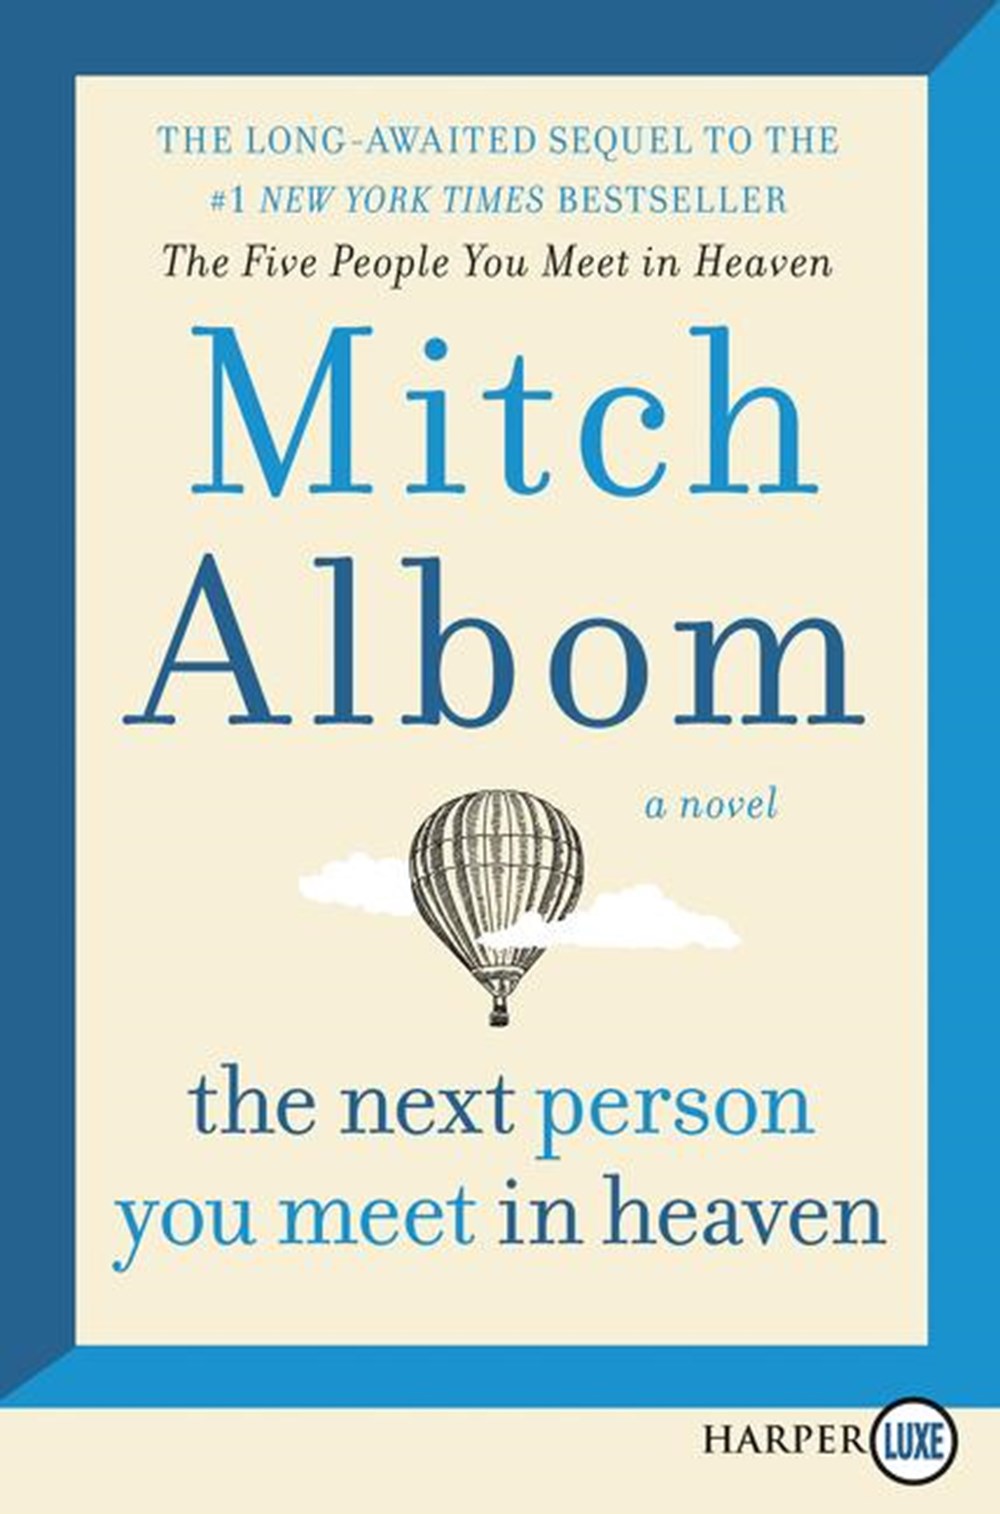 Next Person You Meet in Heaven: The Sequel to the Five People You Meet in Heaven